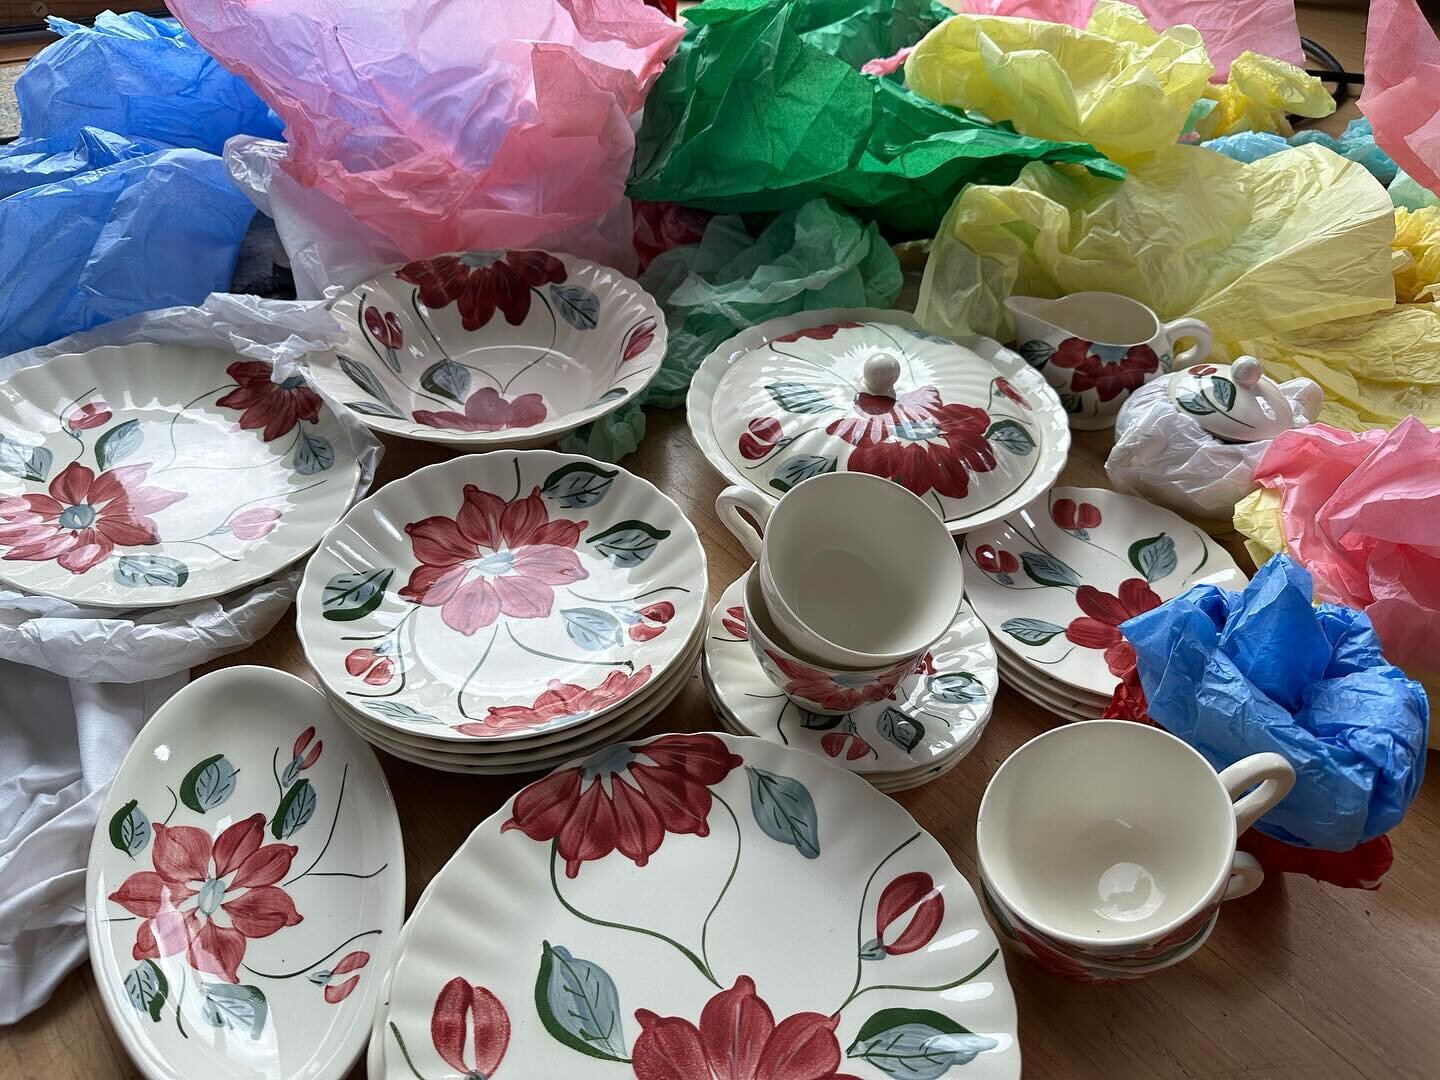 Nostalgia.. dinnerware from my childhood in Totowa NJ that has been in a box wrapped by my sister @carolyncardillo Happy Easter! Made in USA; small plates for appropriate portions; Looking forward to sharing meals with friends and family #familynosta